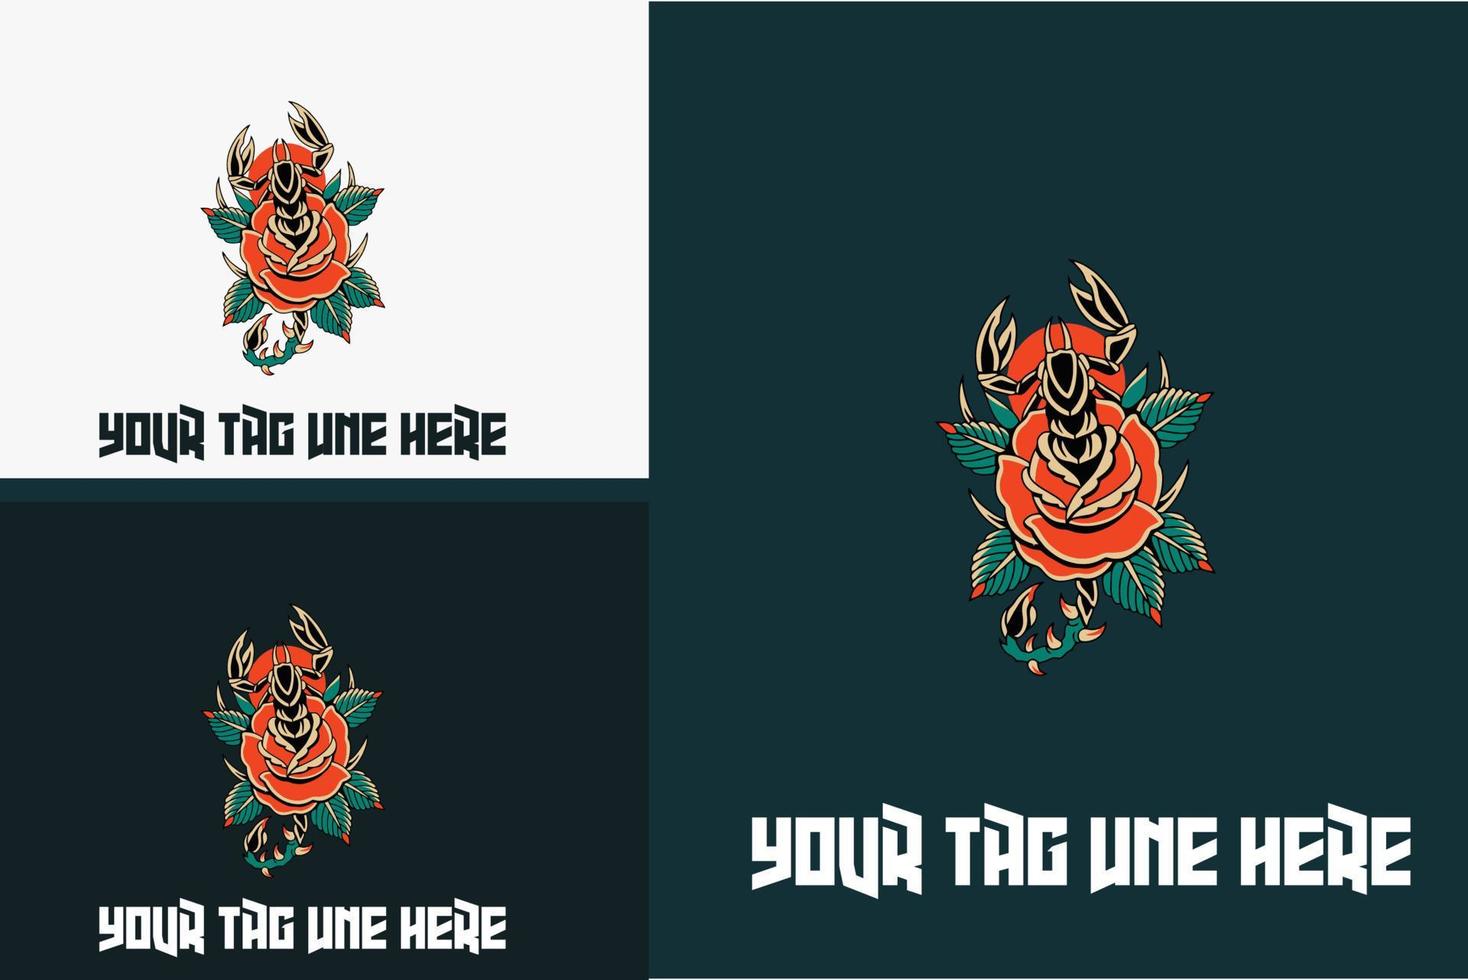 logo concept of scorpion with red rose vector illustration design